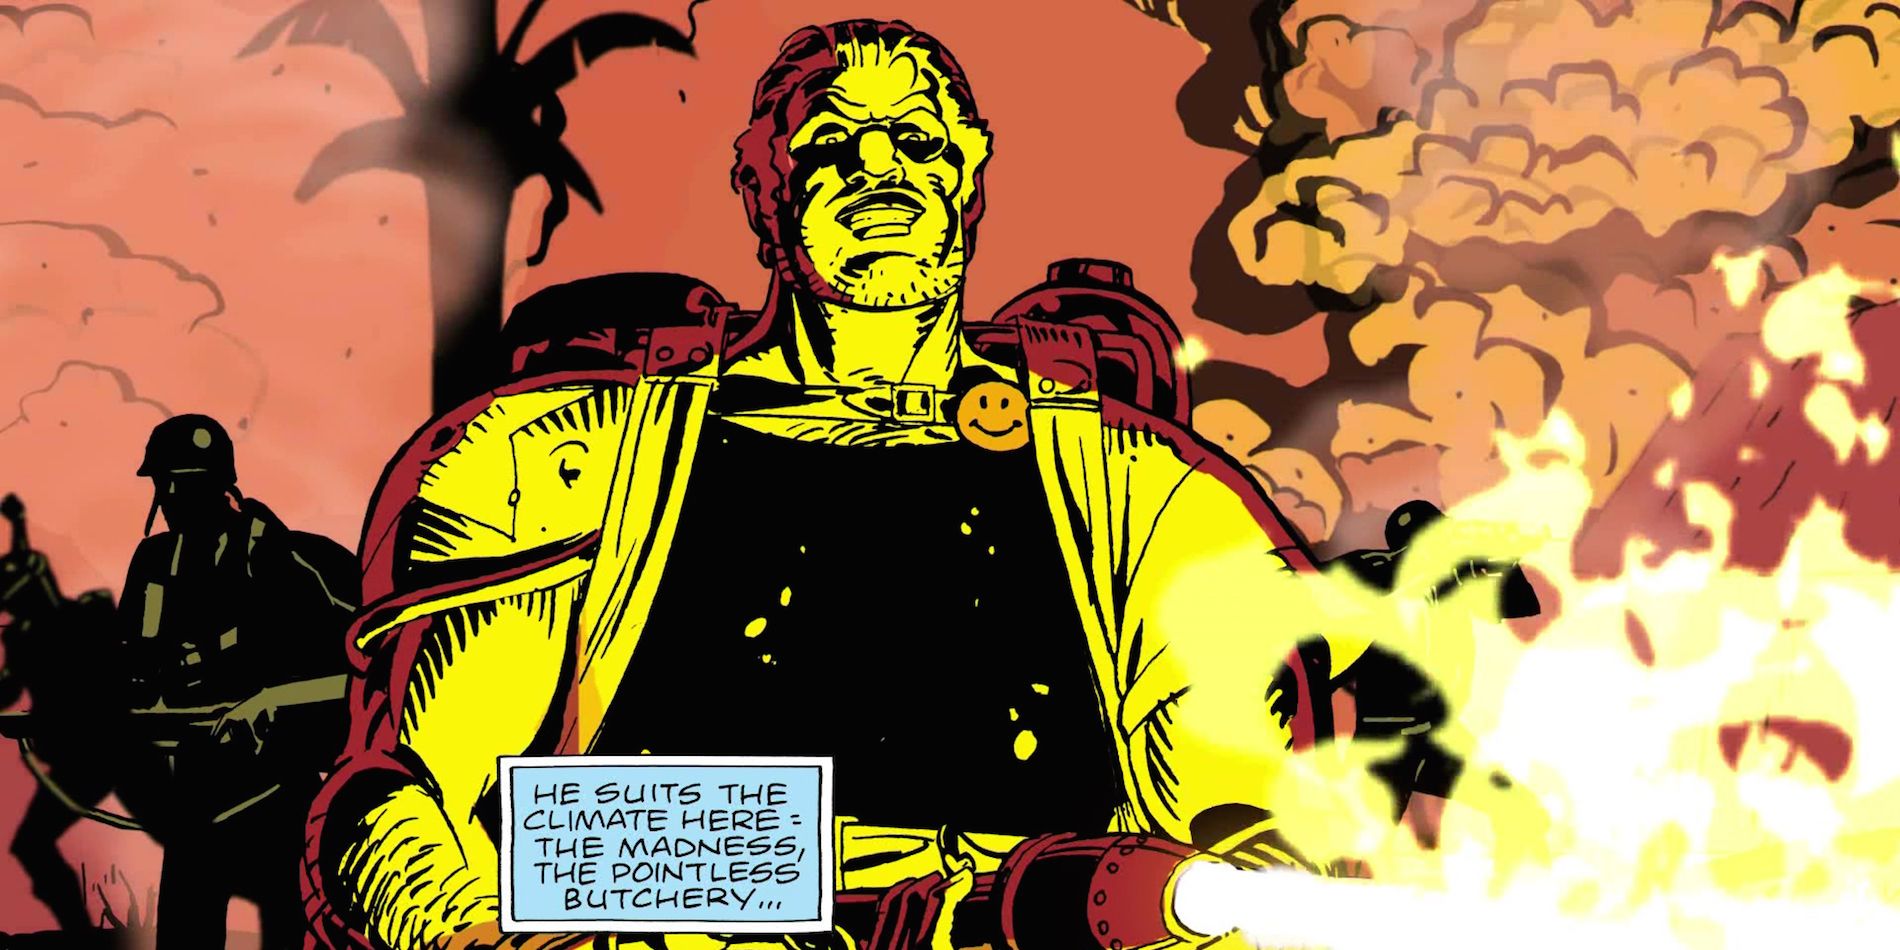 The Comedian in the Watchmen comic